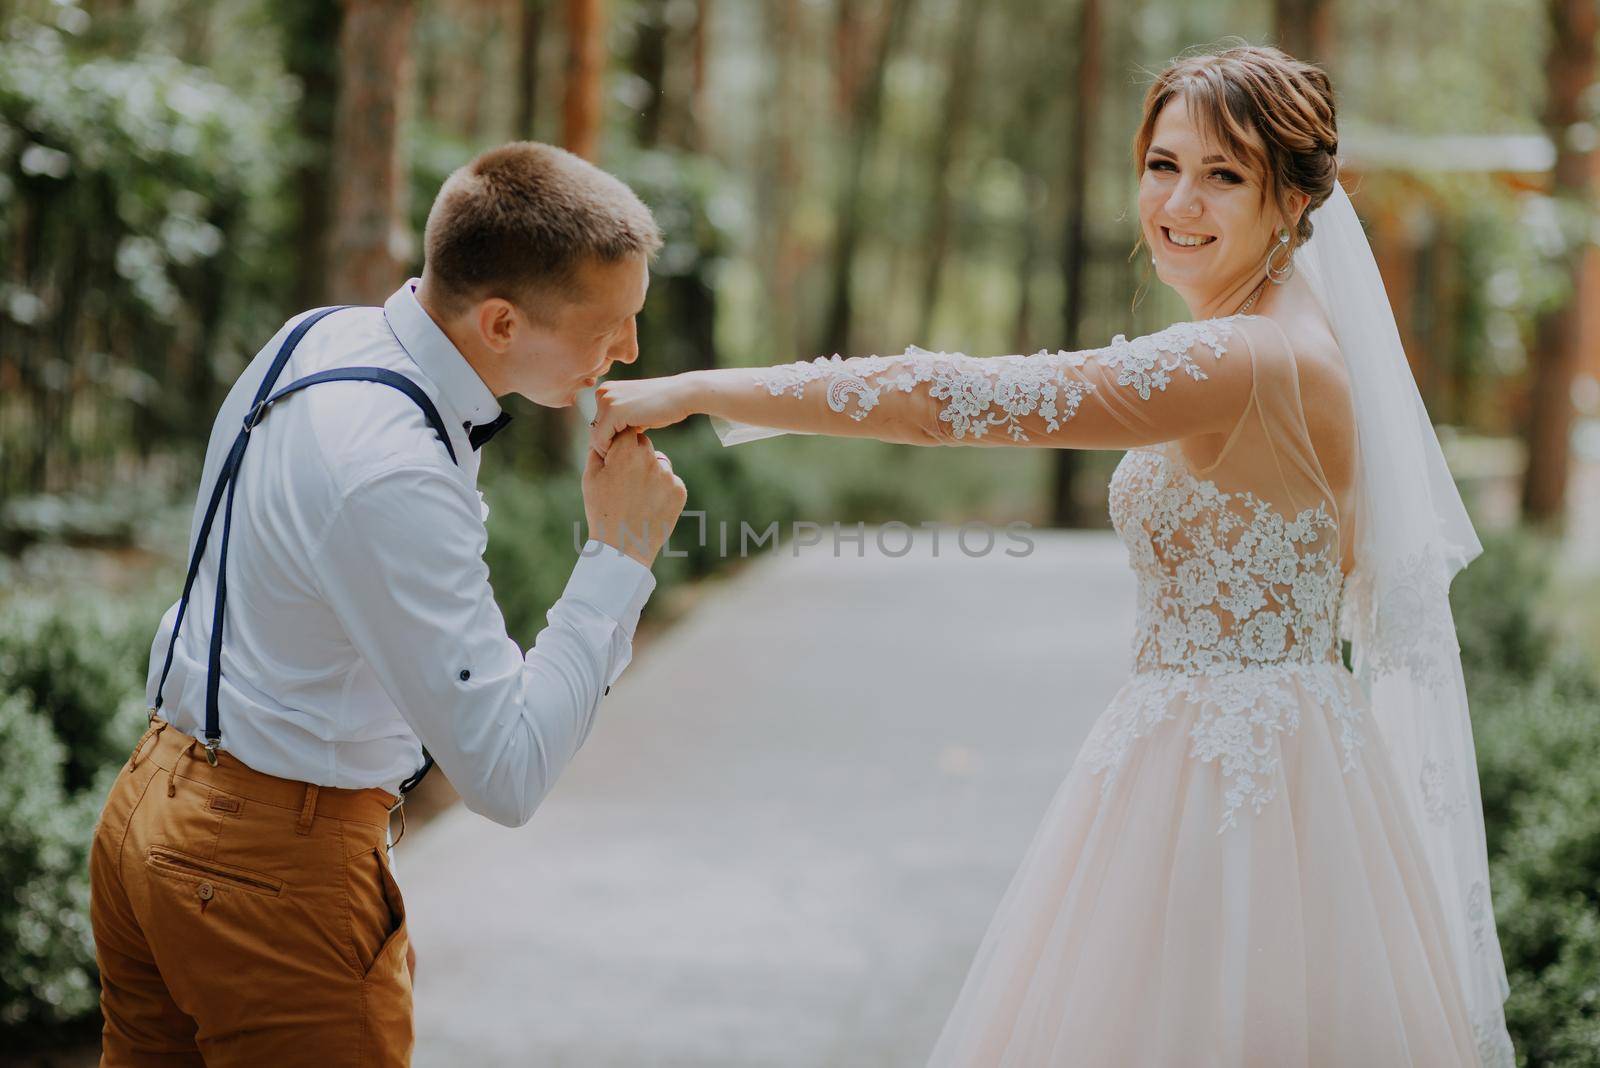 Sensual portrait of a young couple. Wedding photo outdoor. Wedding shot of bride and groom in park. Just married couple embraced